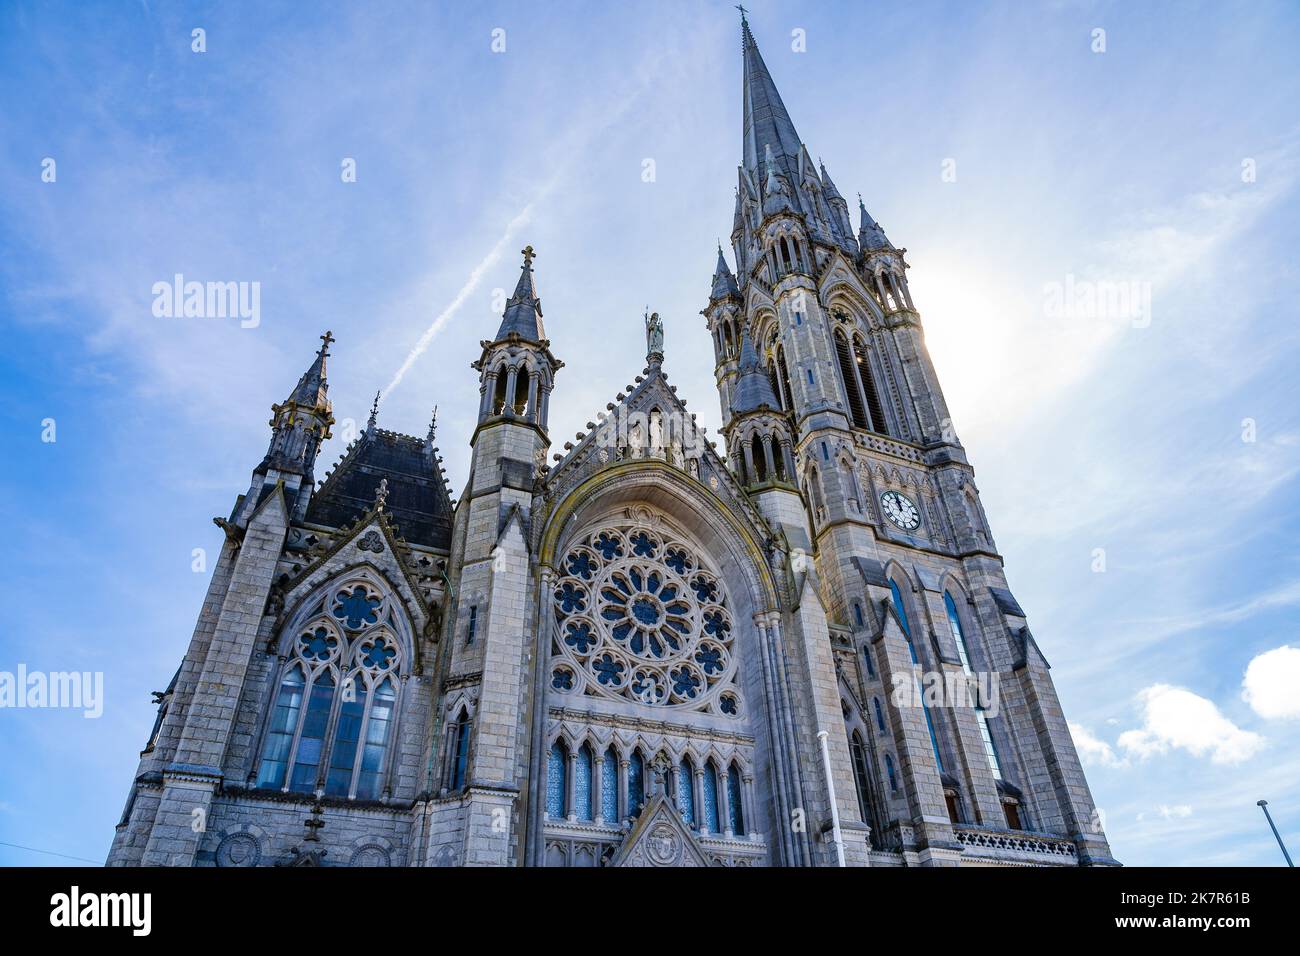 St. Colman's Cathedral in Cobh, Ireland has granite spire and is designed in French Gothic style Stock Photo